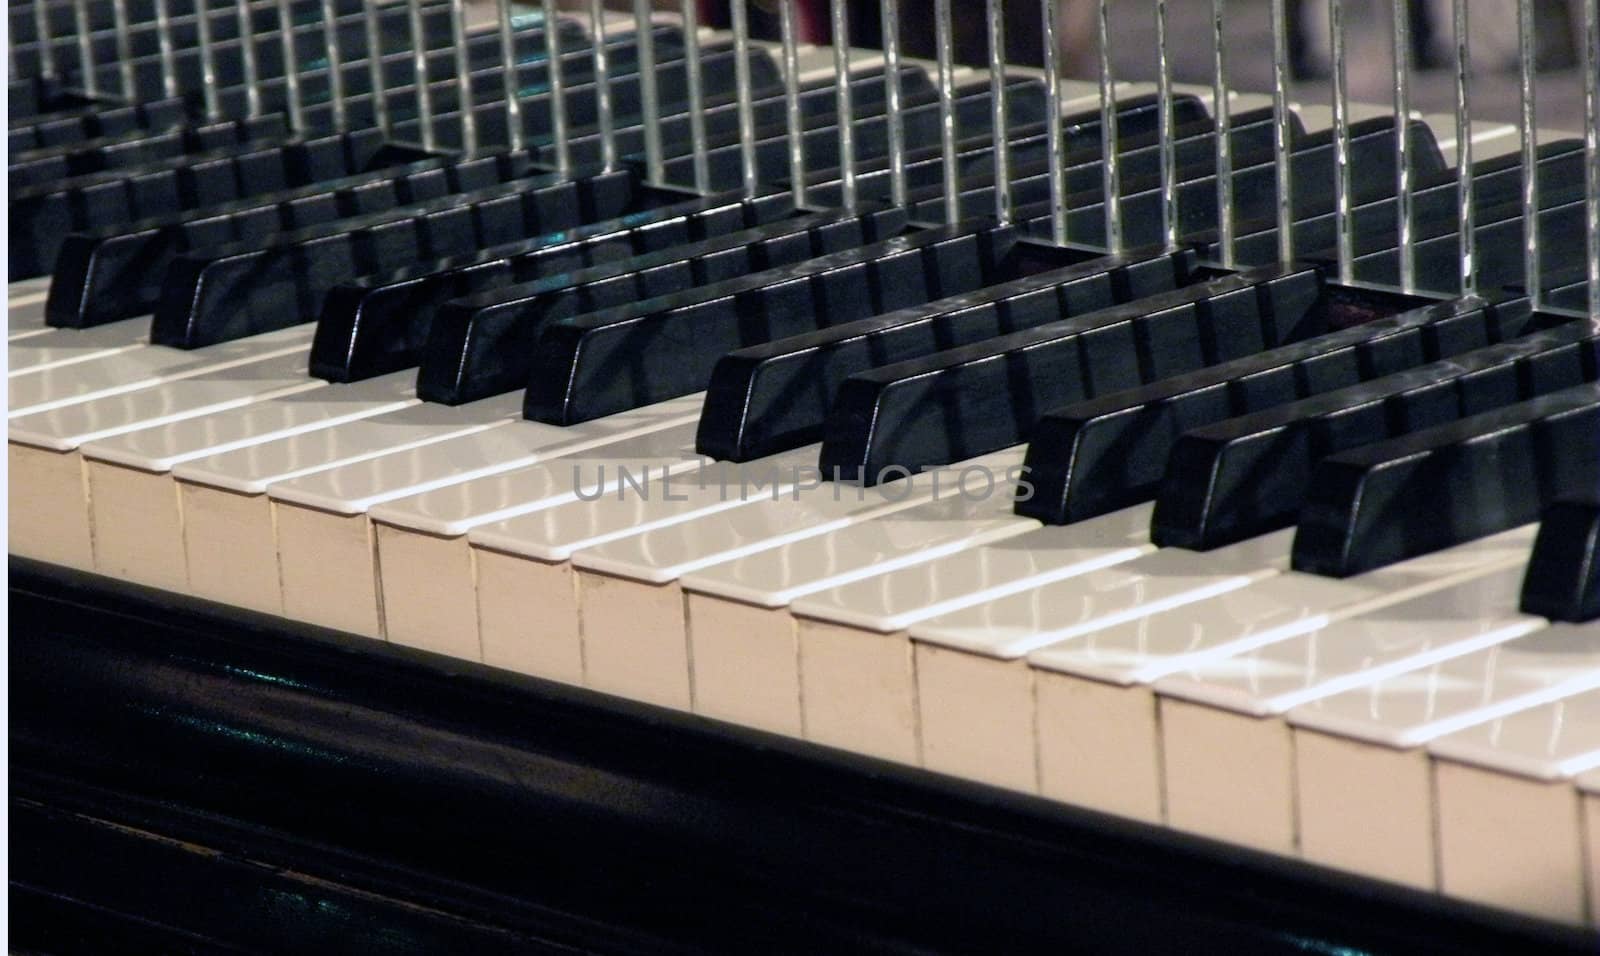 a piano keyboard with reflective mirror mounted behind it.